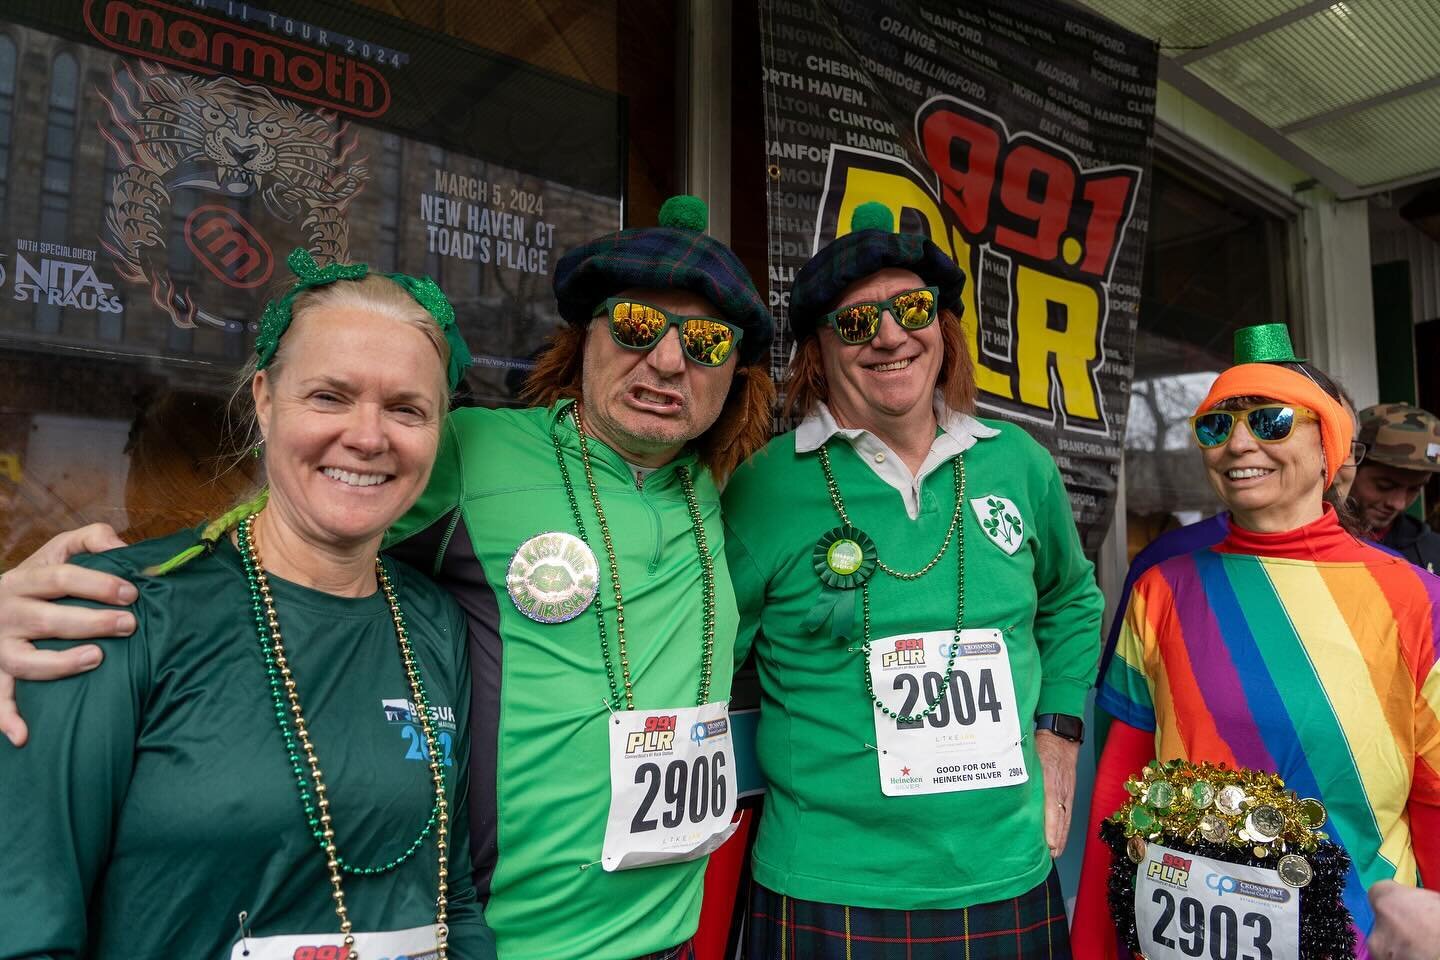 We hope you had a shamROCKIN&rsquo; time at the race this past Sunday☘️🇮🇪❤️Let&rsquo;s hope the weather repeats itself for the New Haven St. Patrick&rsquo;s Day Parade this Sunday! #jbsportsevents #jbsports #stpattysday #shamrockandroll